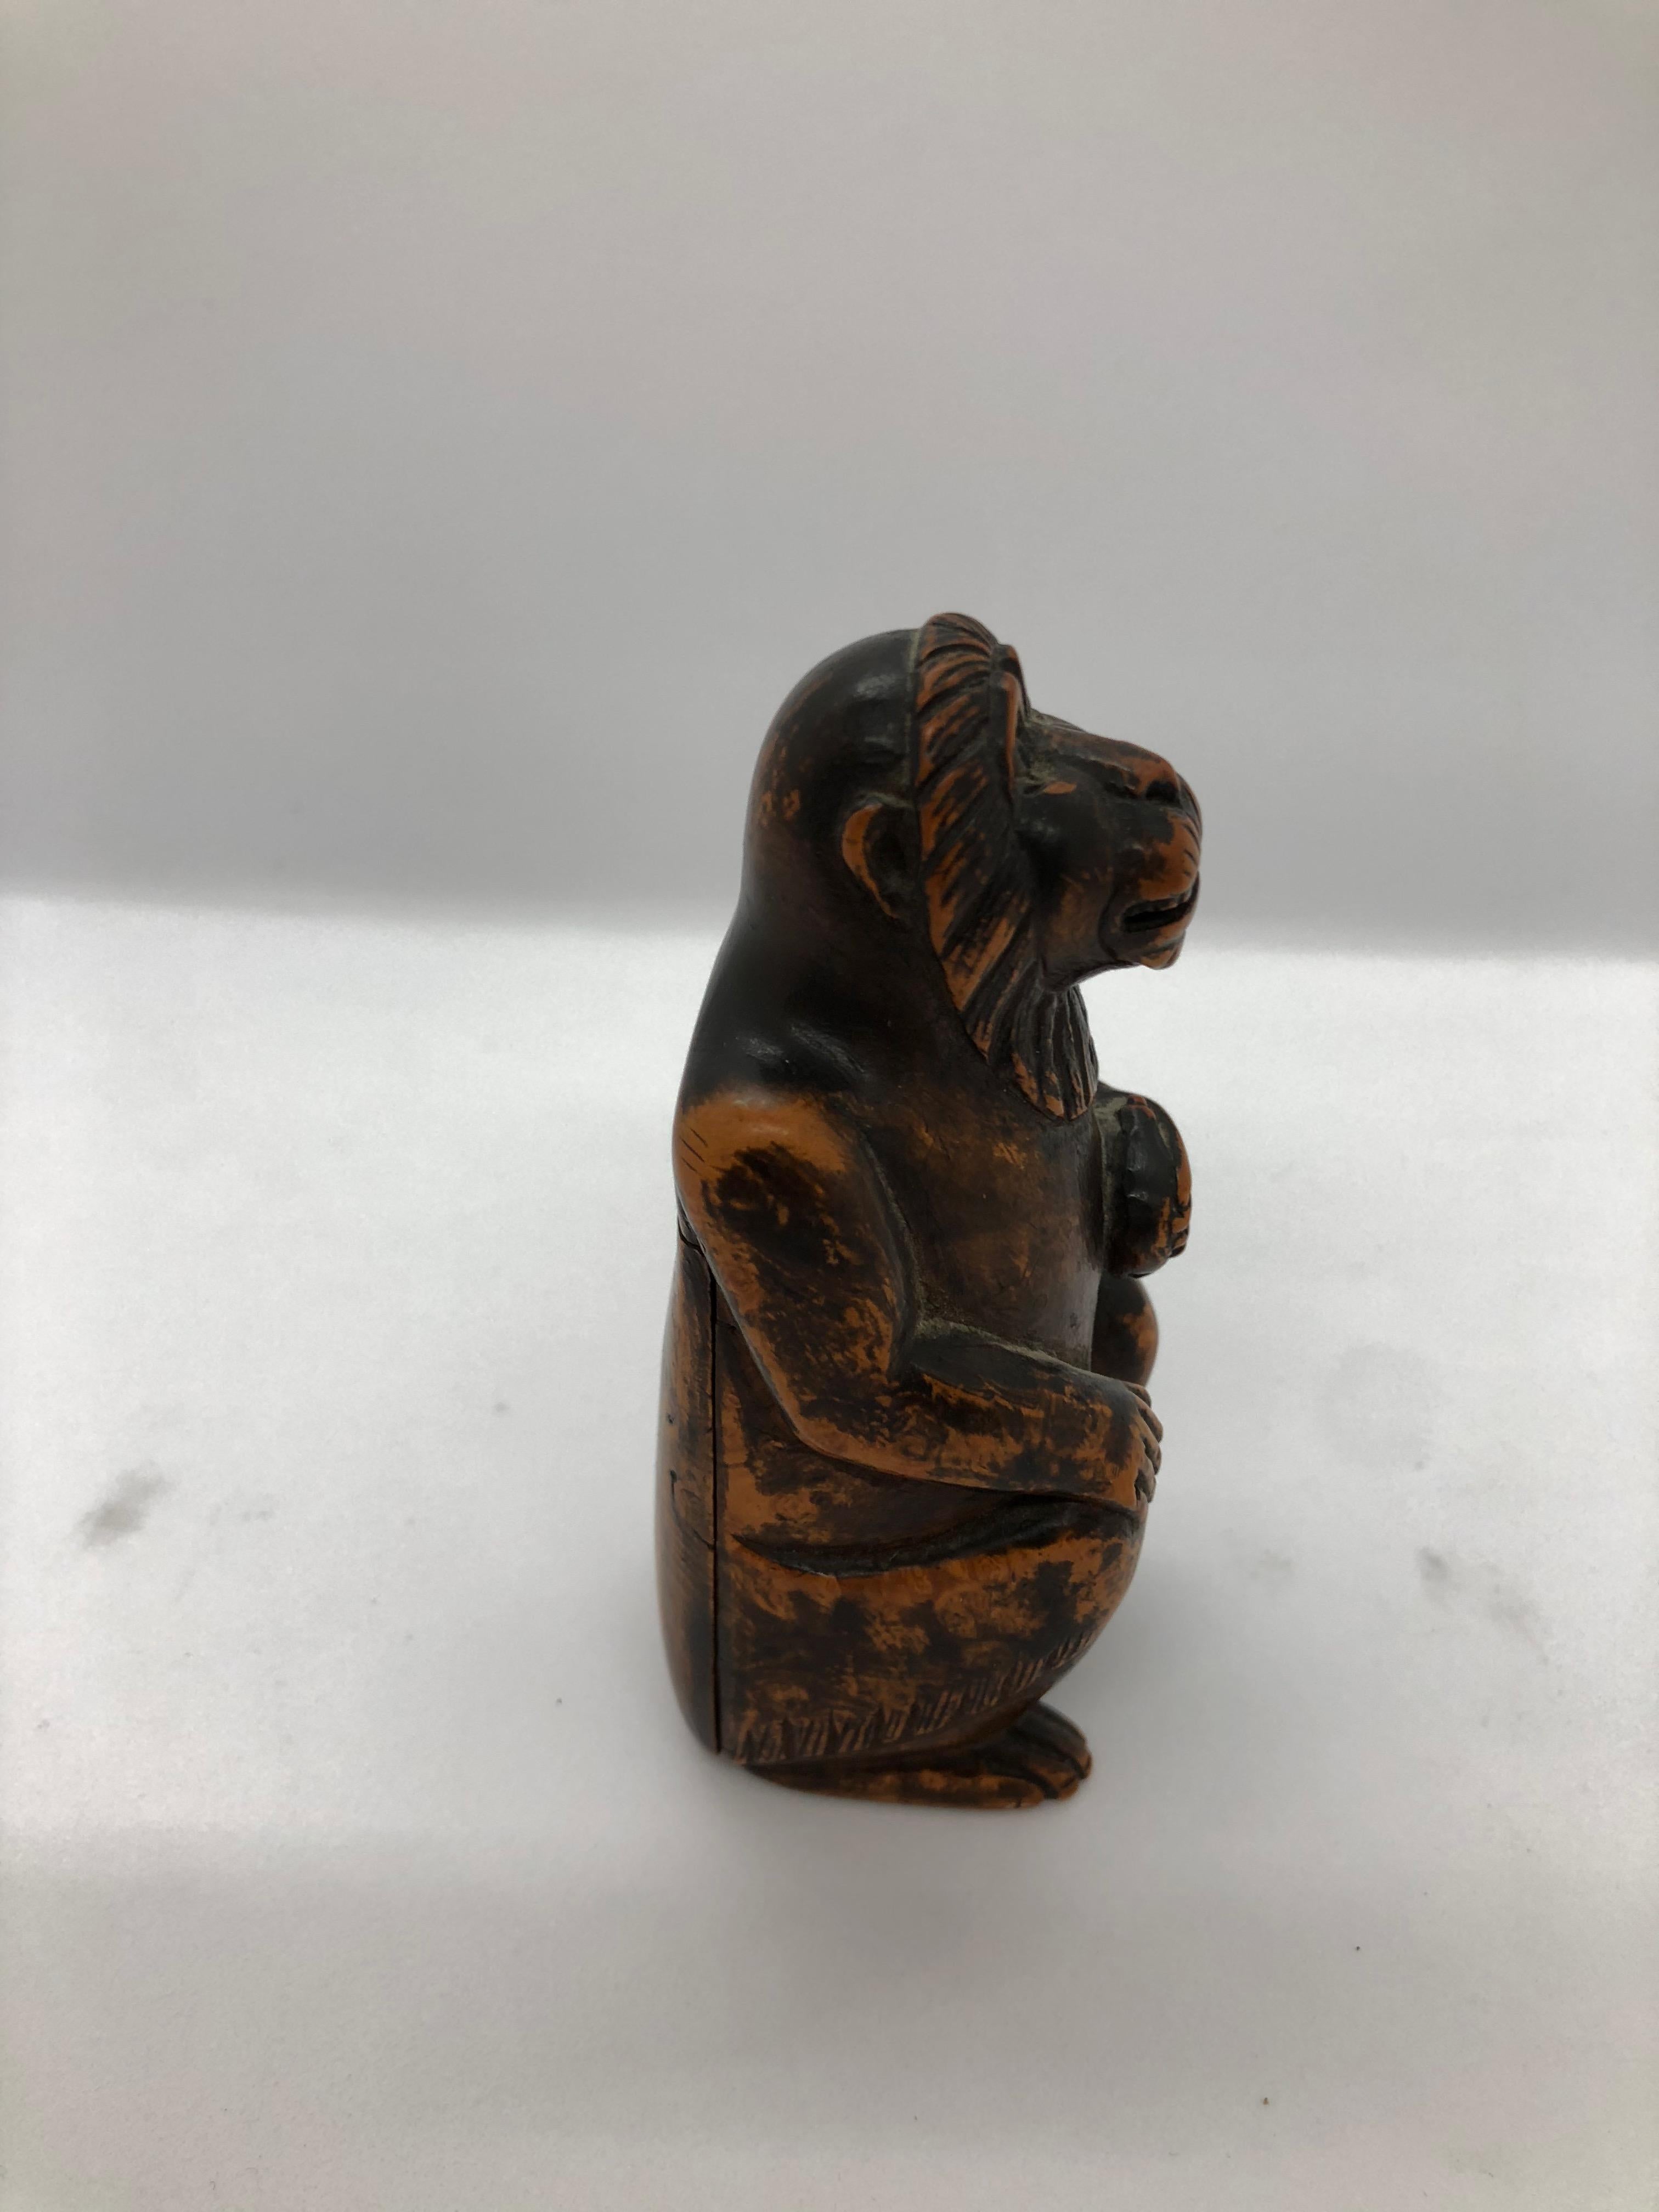 Hand-Carved Box in the Shape of a Monkey, 19th Century